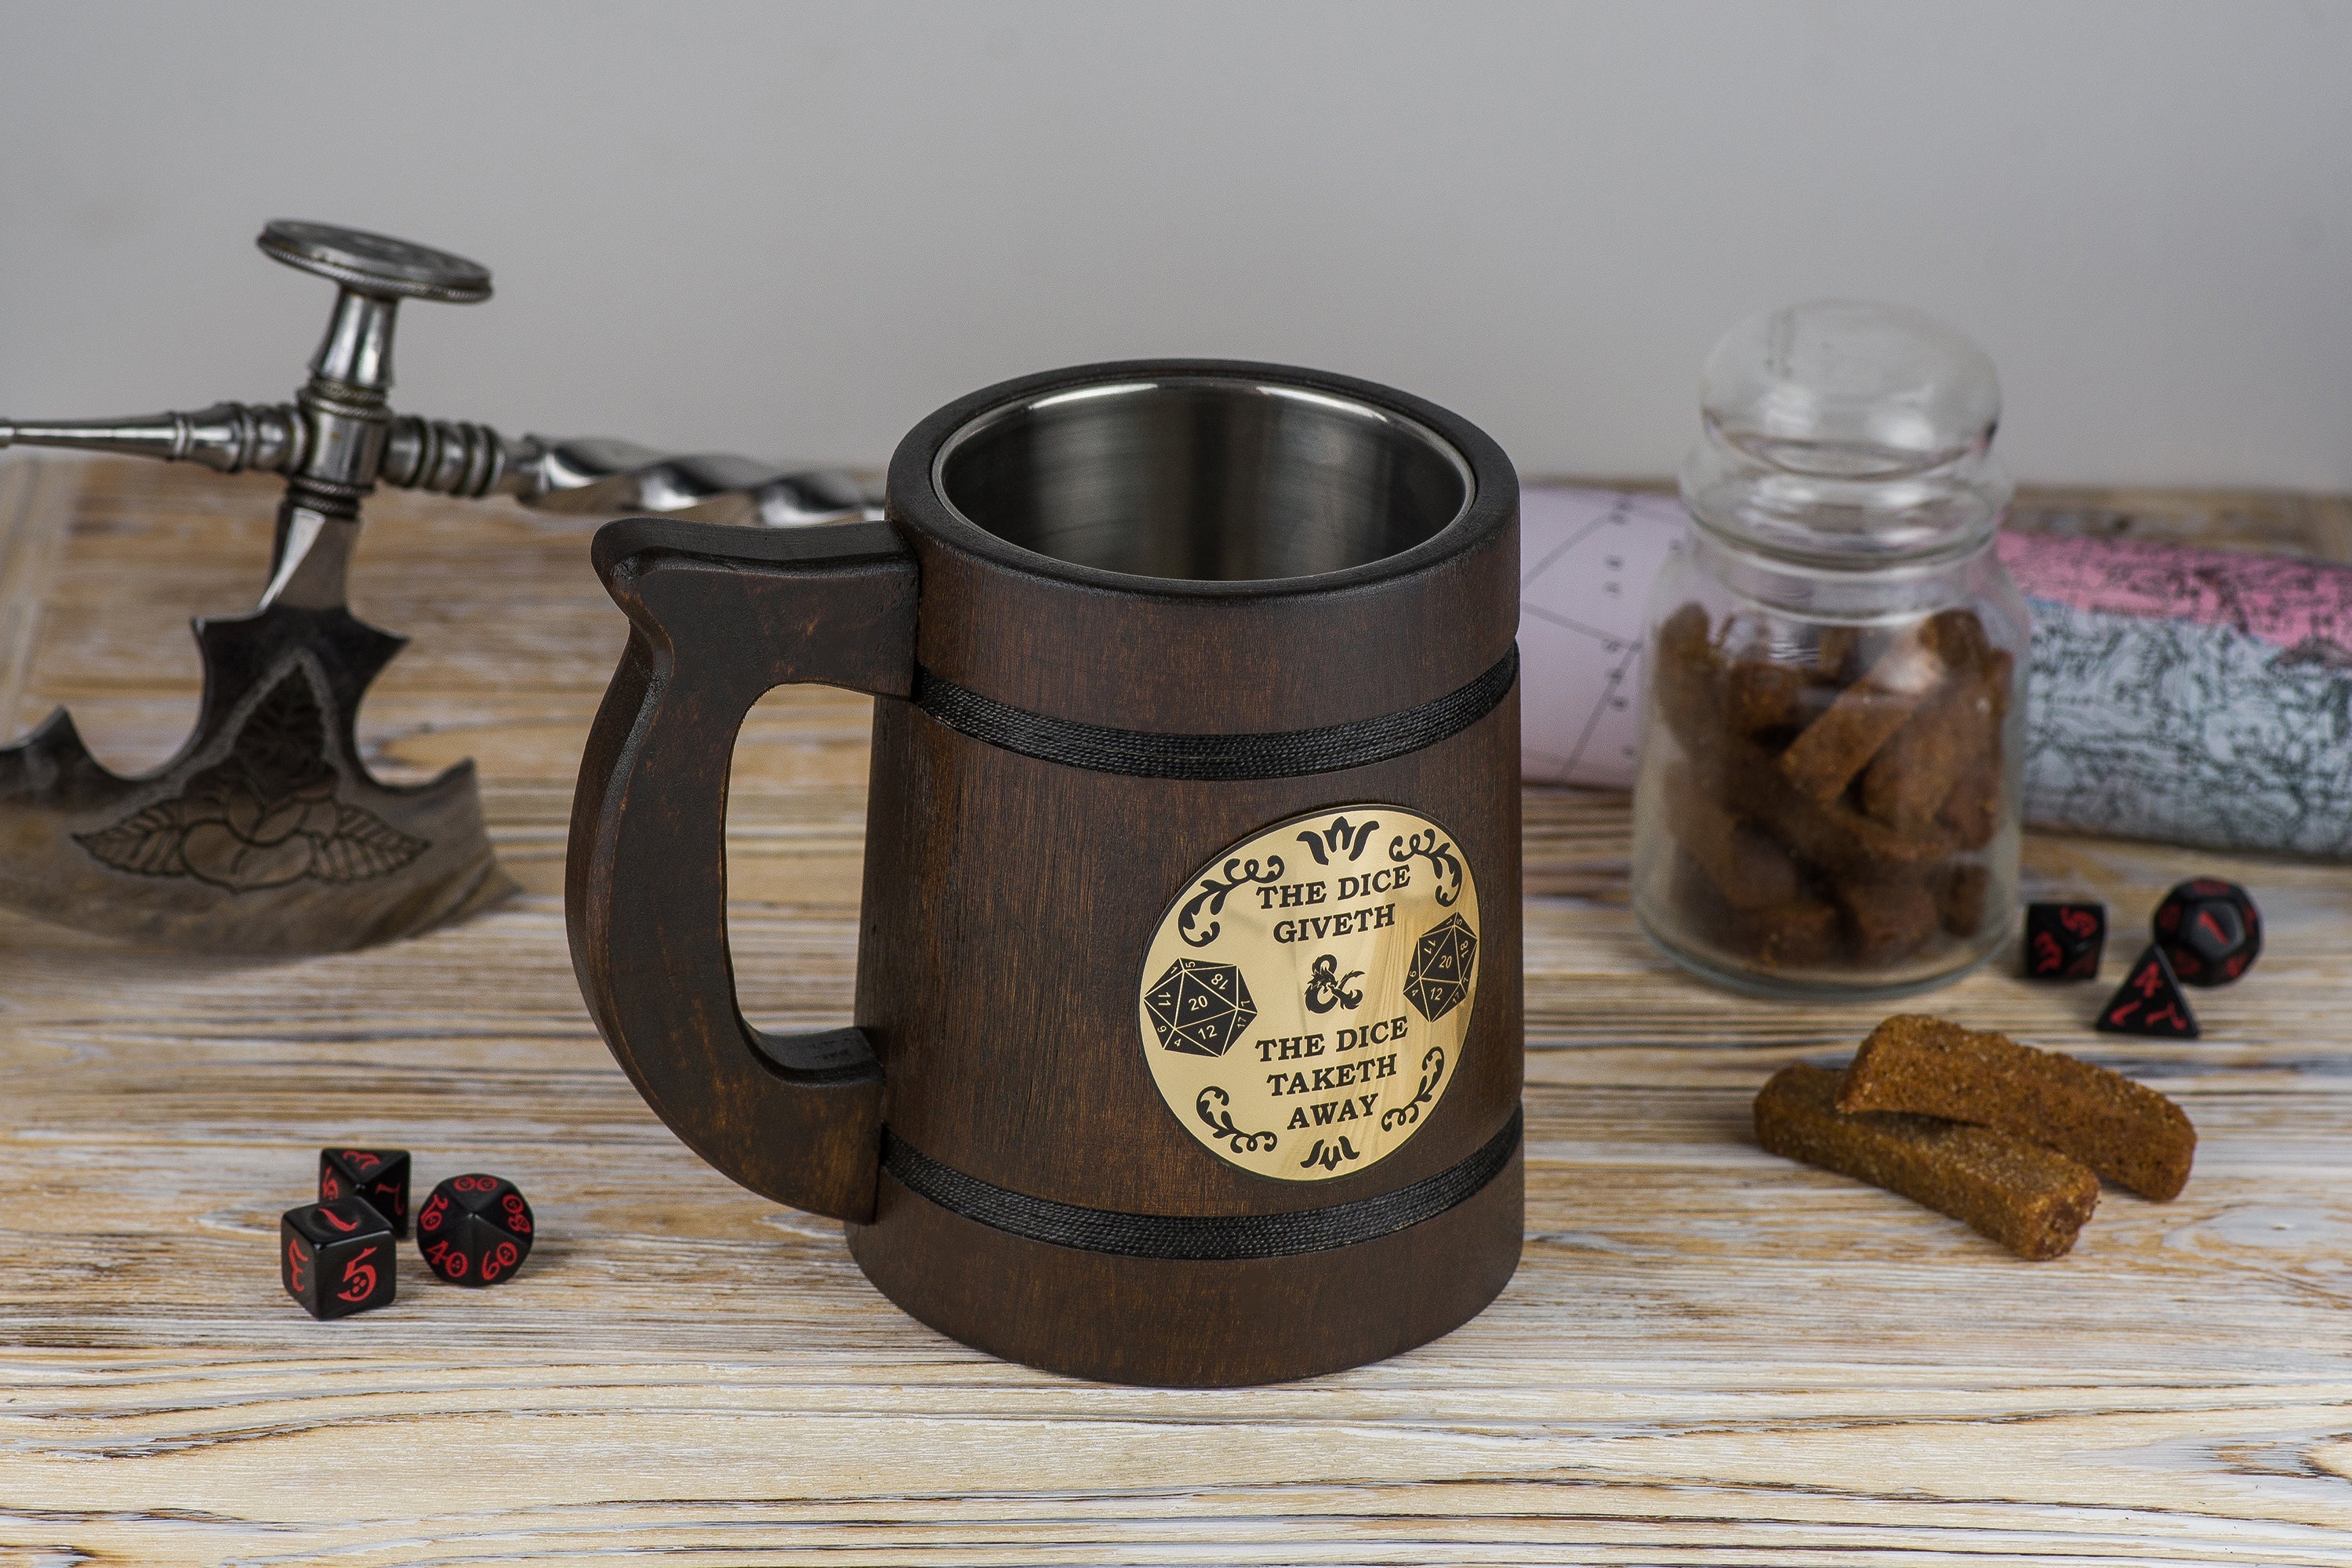 D&D wooden mug "The dice giveth and the dice taketh away", DND Mugs - GravisCup